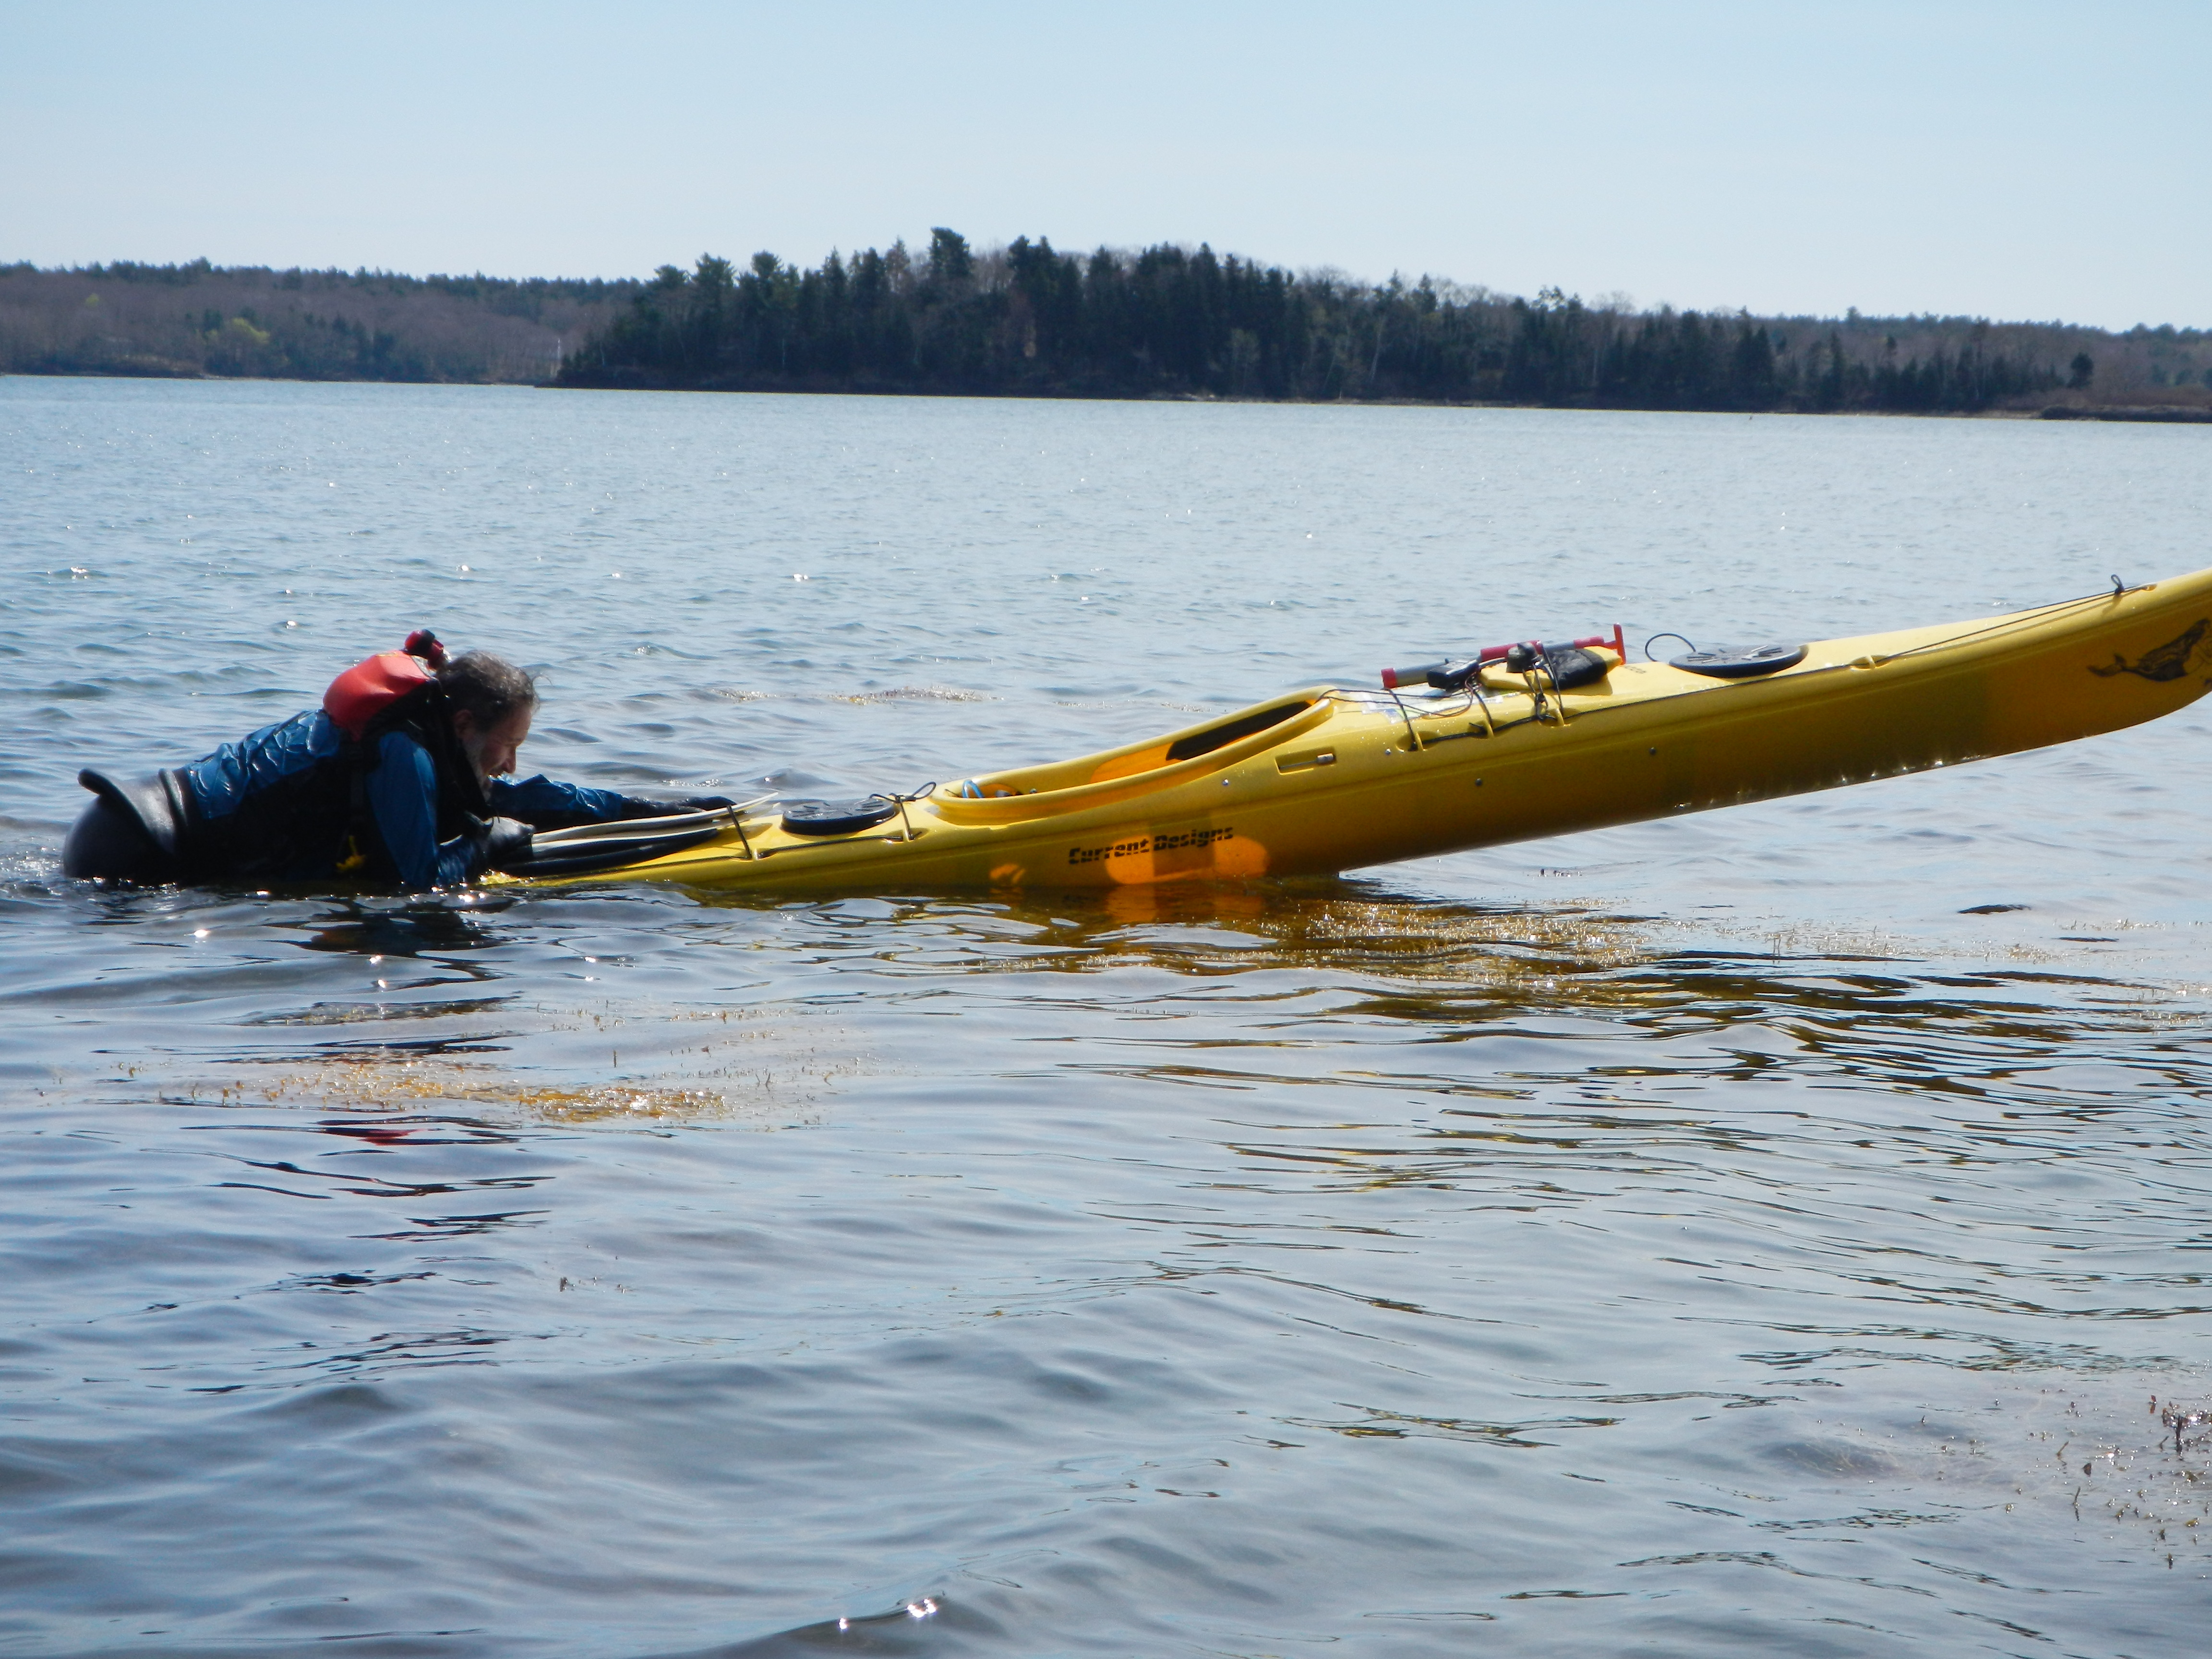 Trying to get into a sea kayak without a paddle